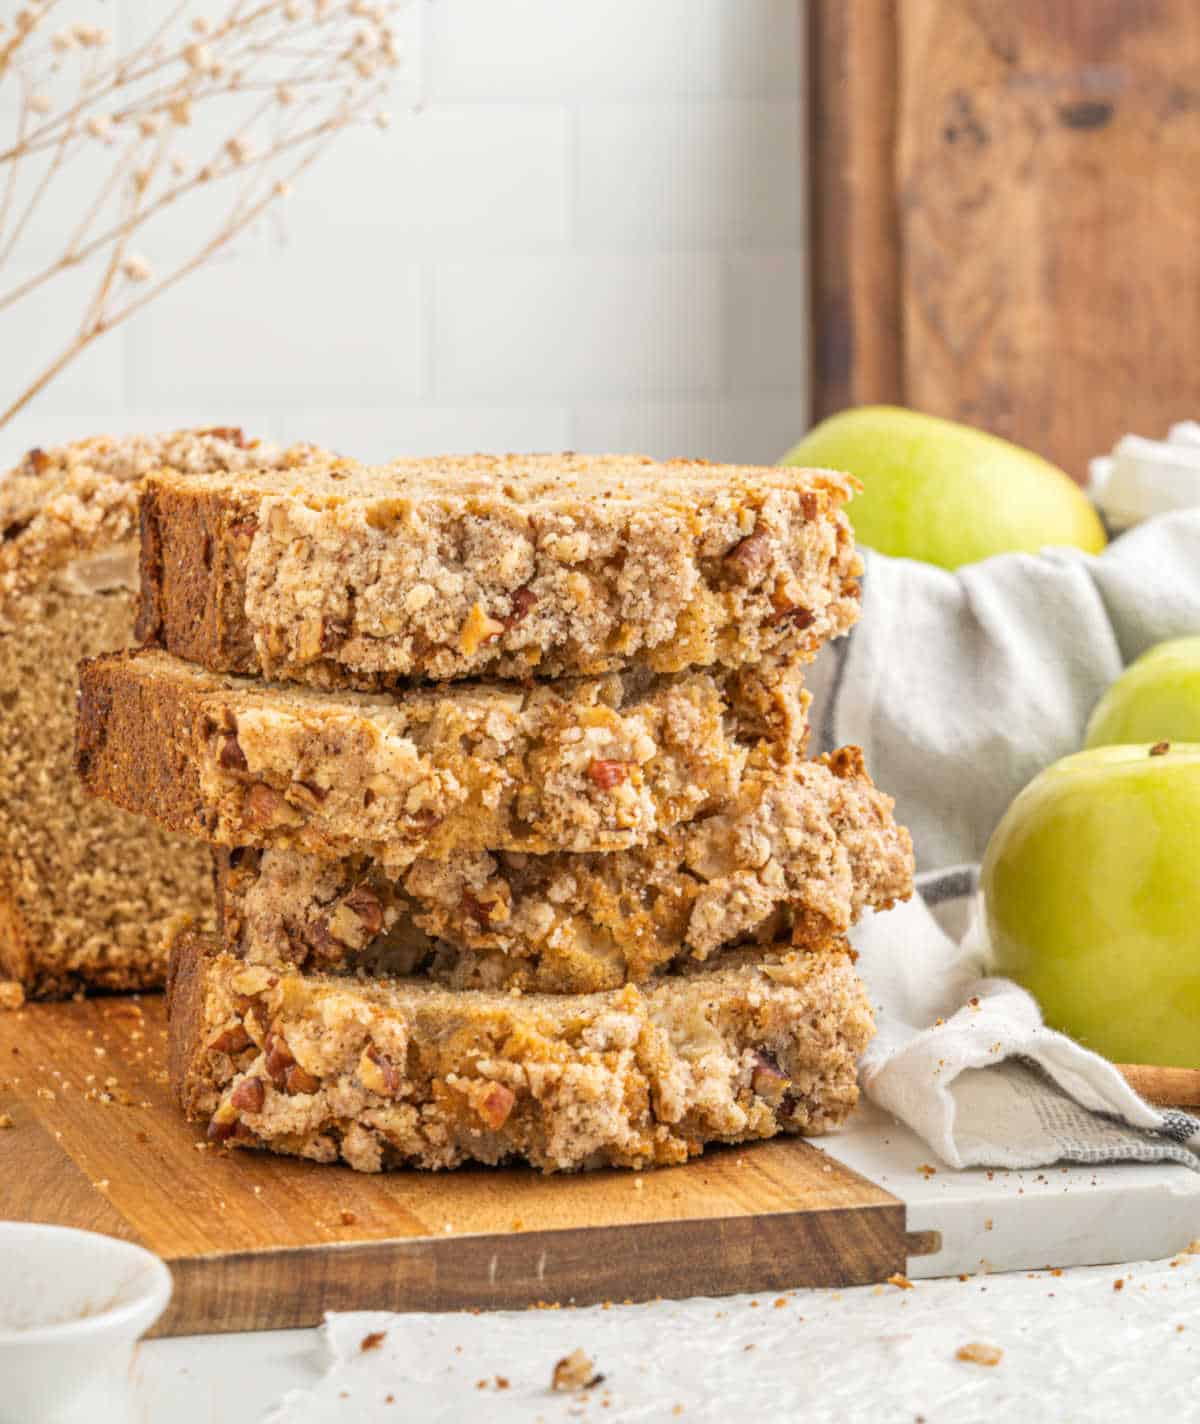 Four slices of apple crumb bread stacked on a wooden board. Green apples and a cloth as props.